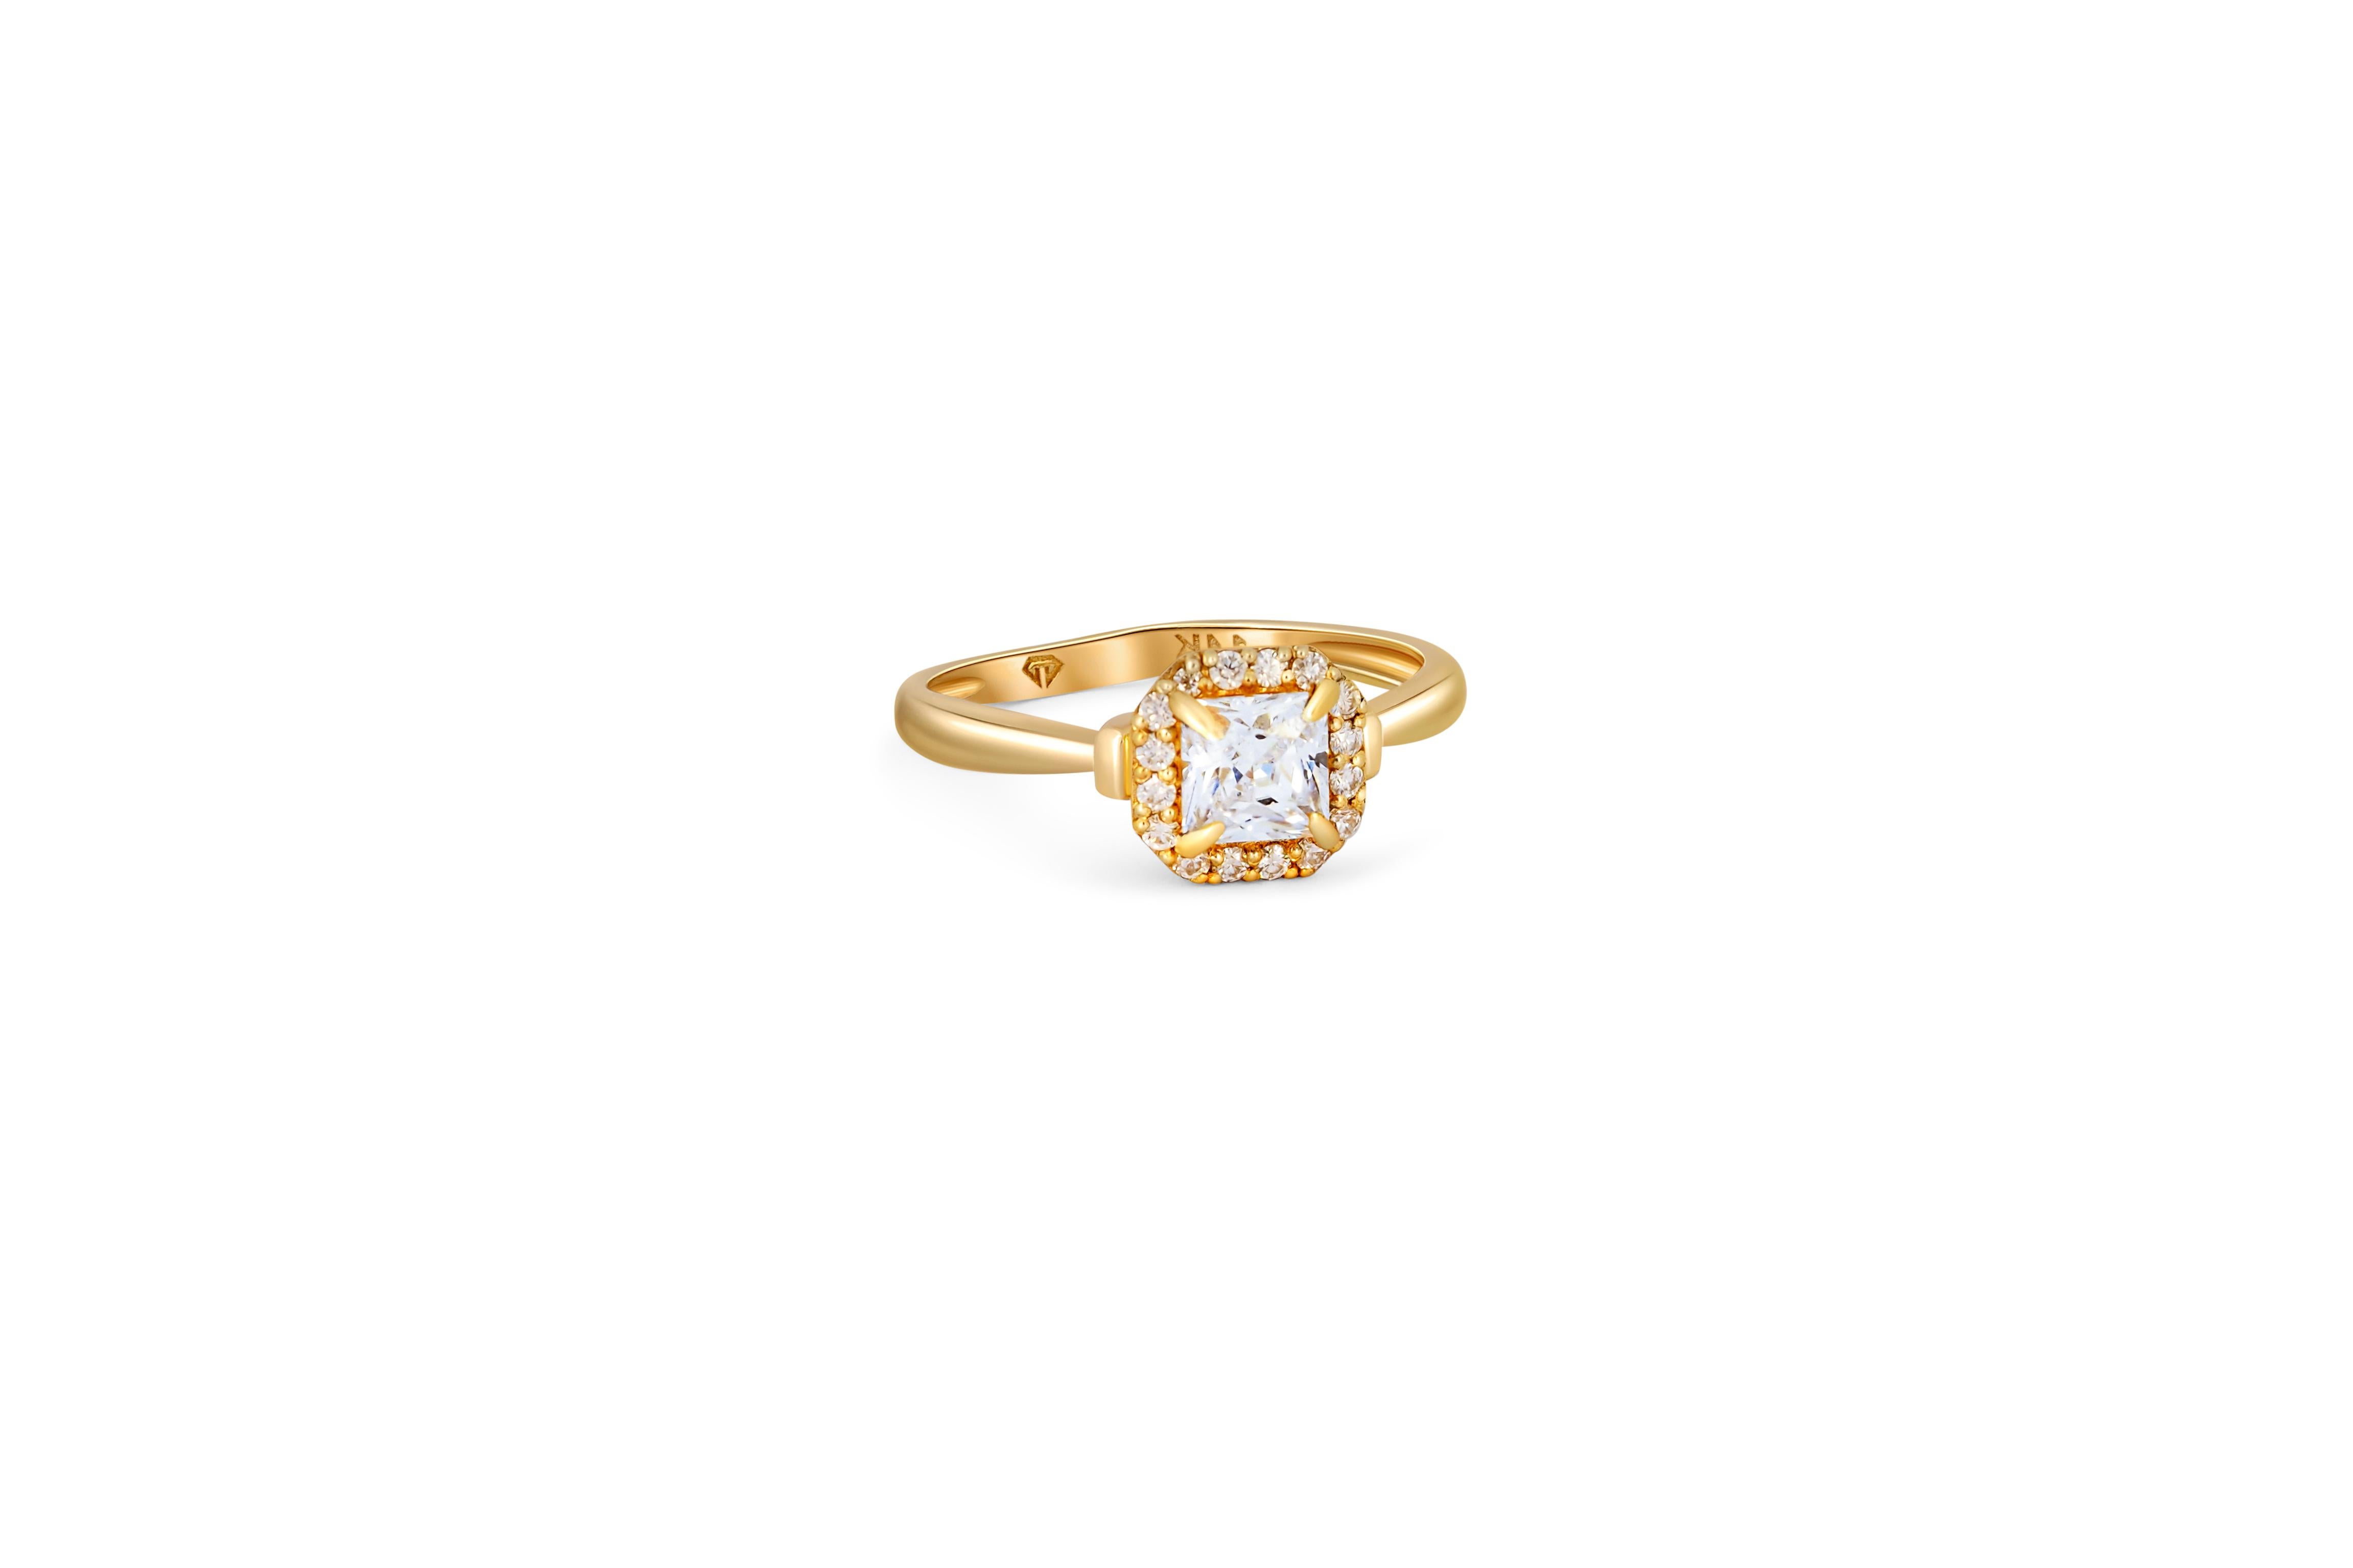 For Sale:  1 ct Princess cut moissanite 14k gold ring.  3